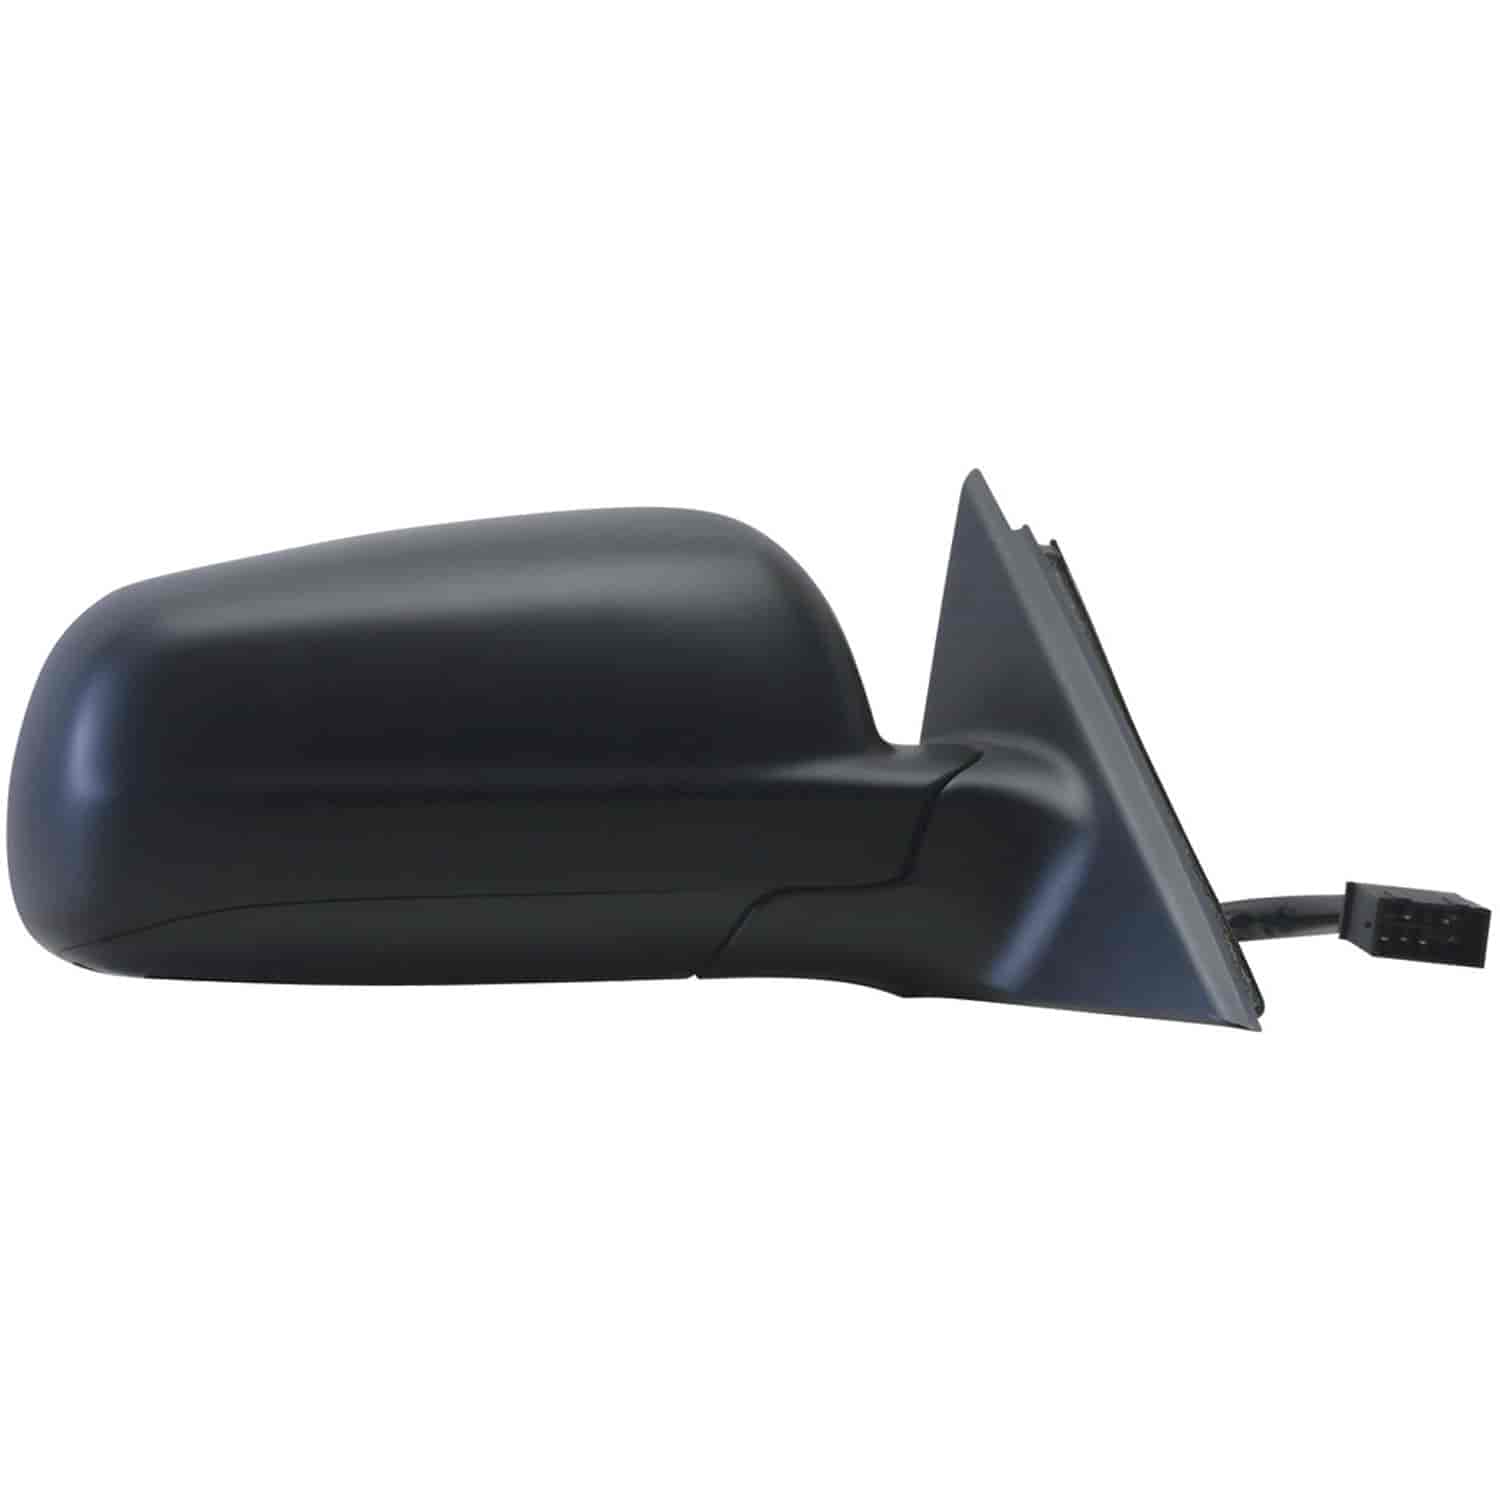 OEM Style Replacement mirror for 98-00 VW Passat passenger side mirror tested to fit and function li